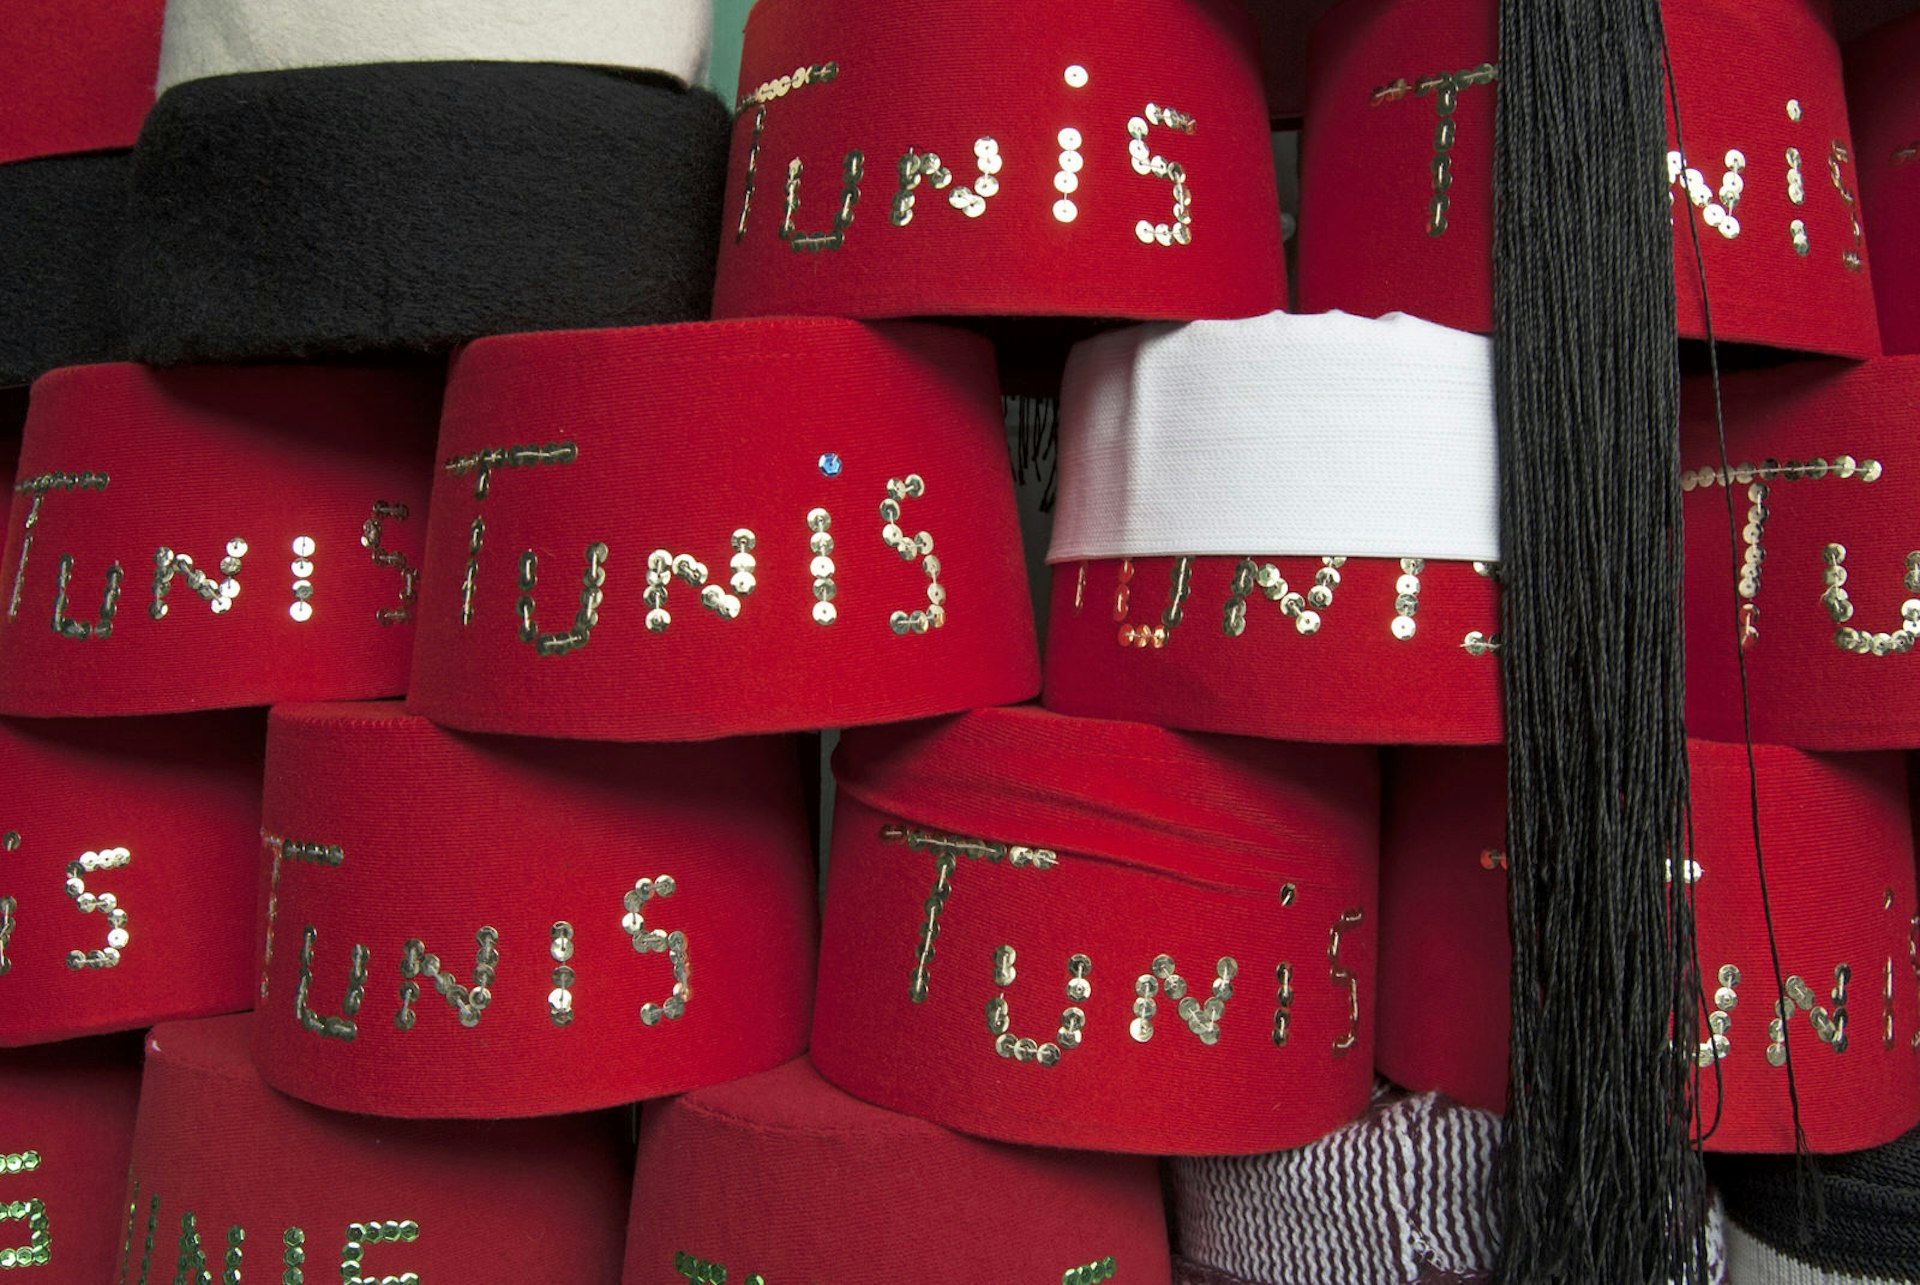 Red fez hats for sale in the medina, Tunis, Tunisia